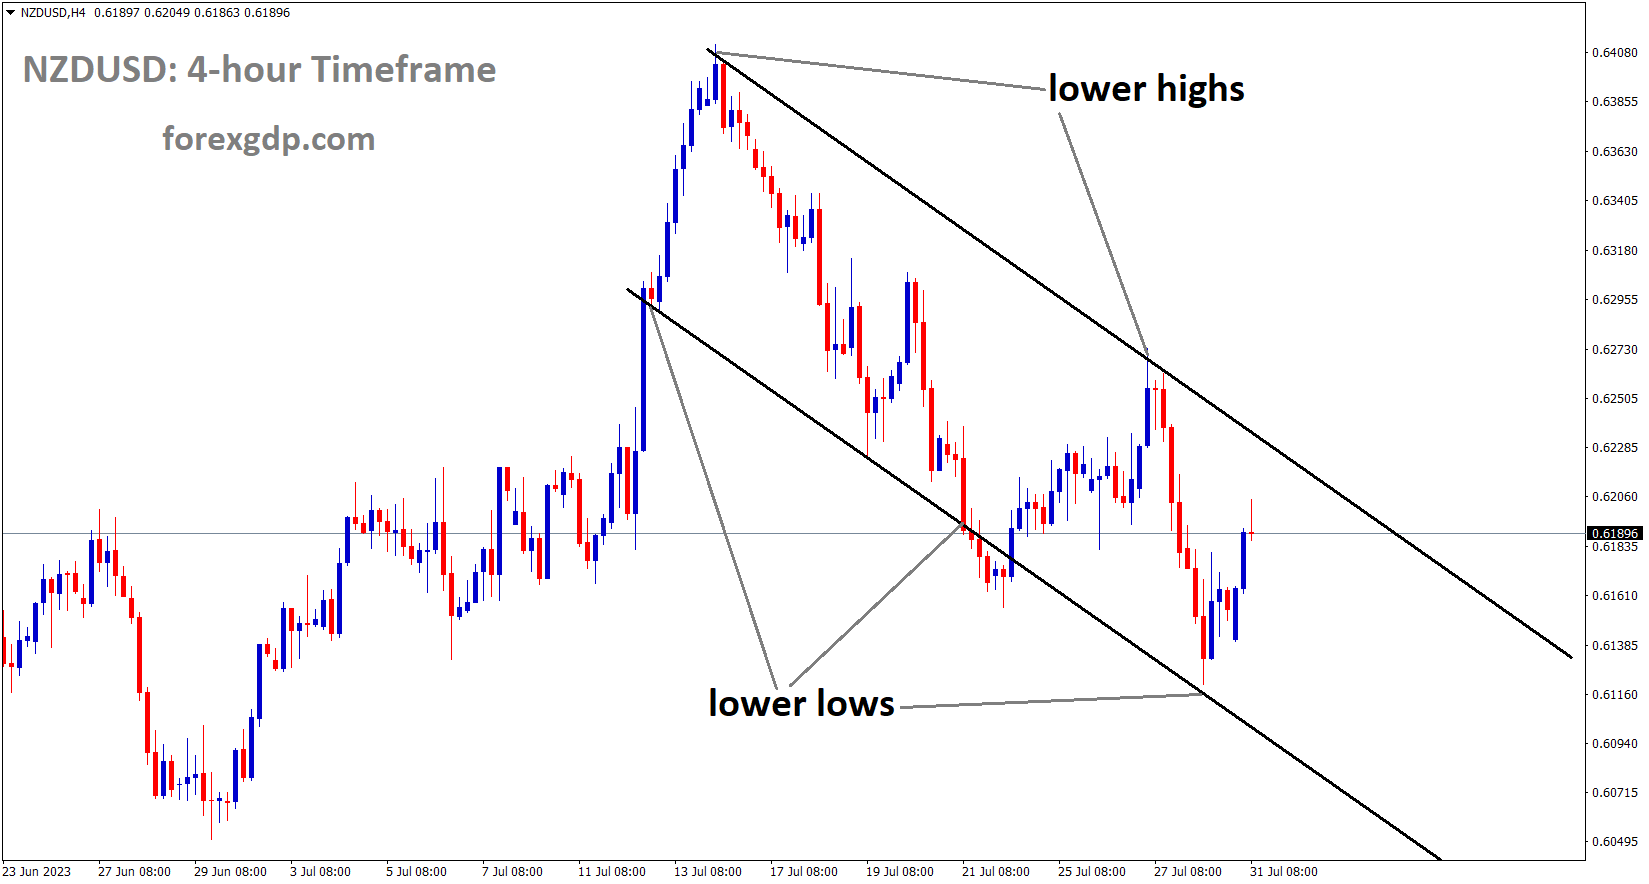 NZDUSD is moving in the Descending channel and the market has rebounded from the lower low area of the channel 1